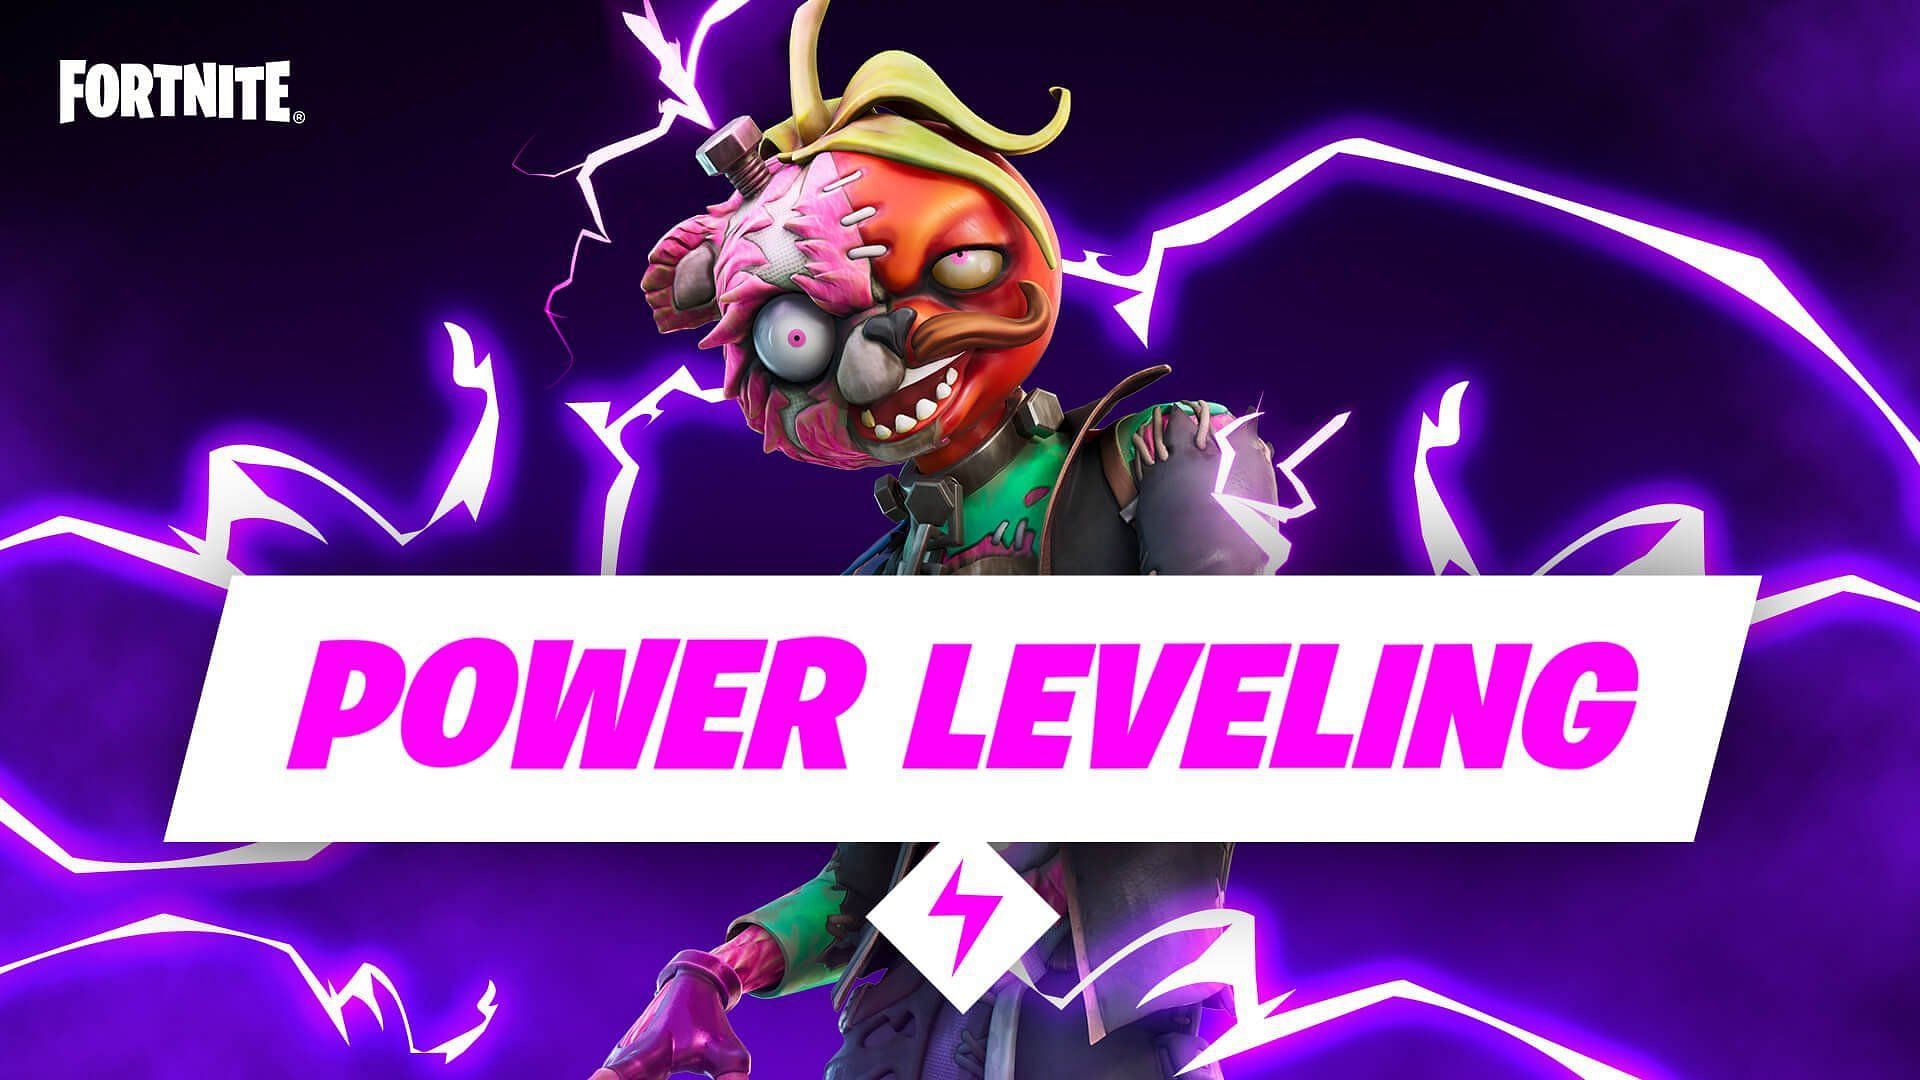 Power Leveling Weekend is here in Fortnite and gamers can earn Supercharged XP in the game (Image via Twitter)